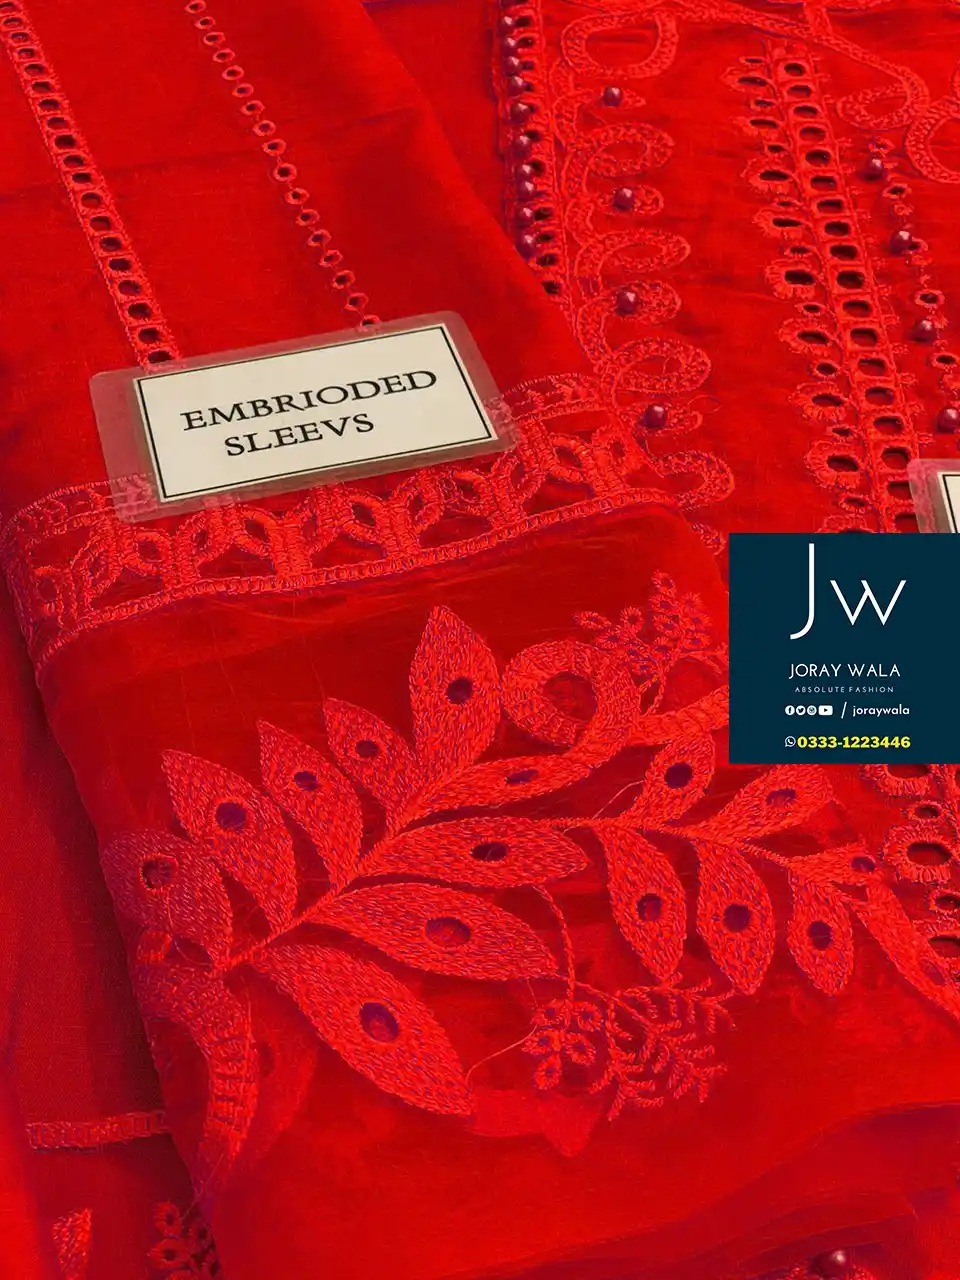 Partywear Fancy lawn 3 pcs suit mb-2310a in beautiful red color with free delivery at joraywala